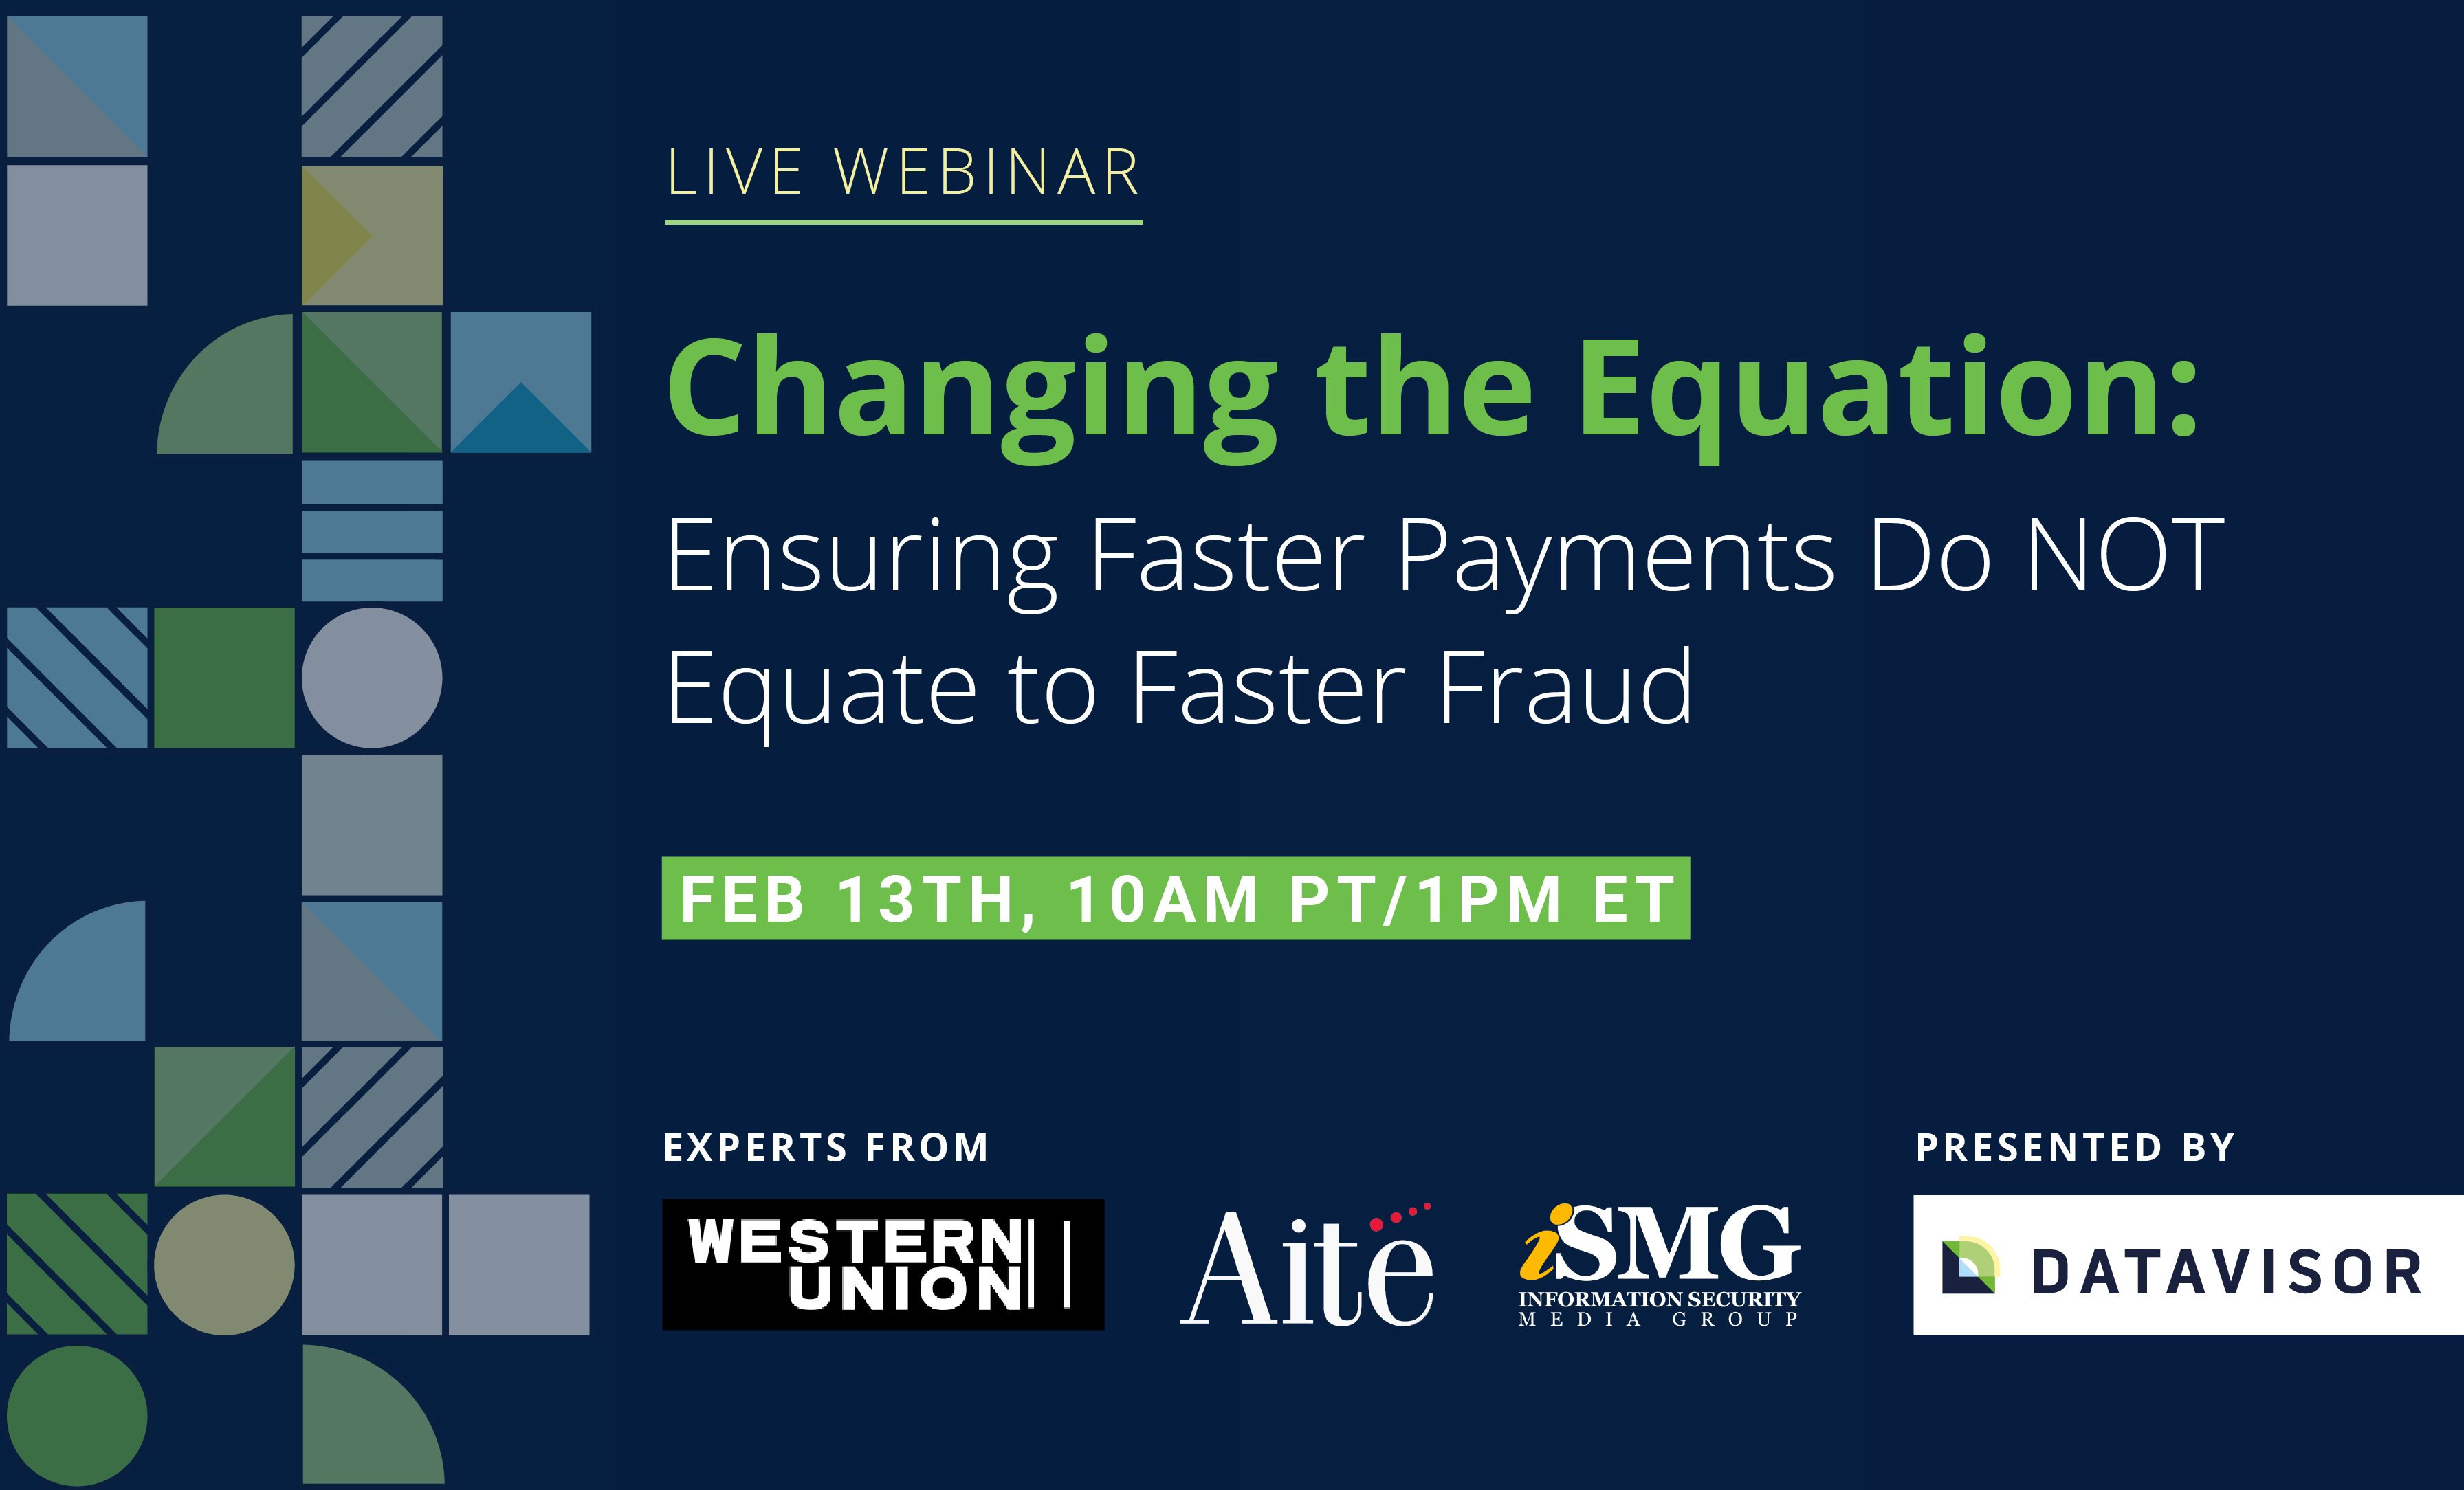 Changing the Equation: Ensuring Faster Payments Do NOT Equate to Faster Fraud